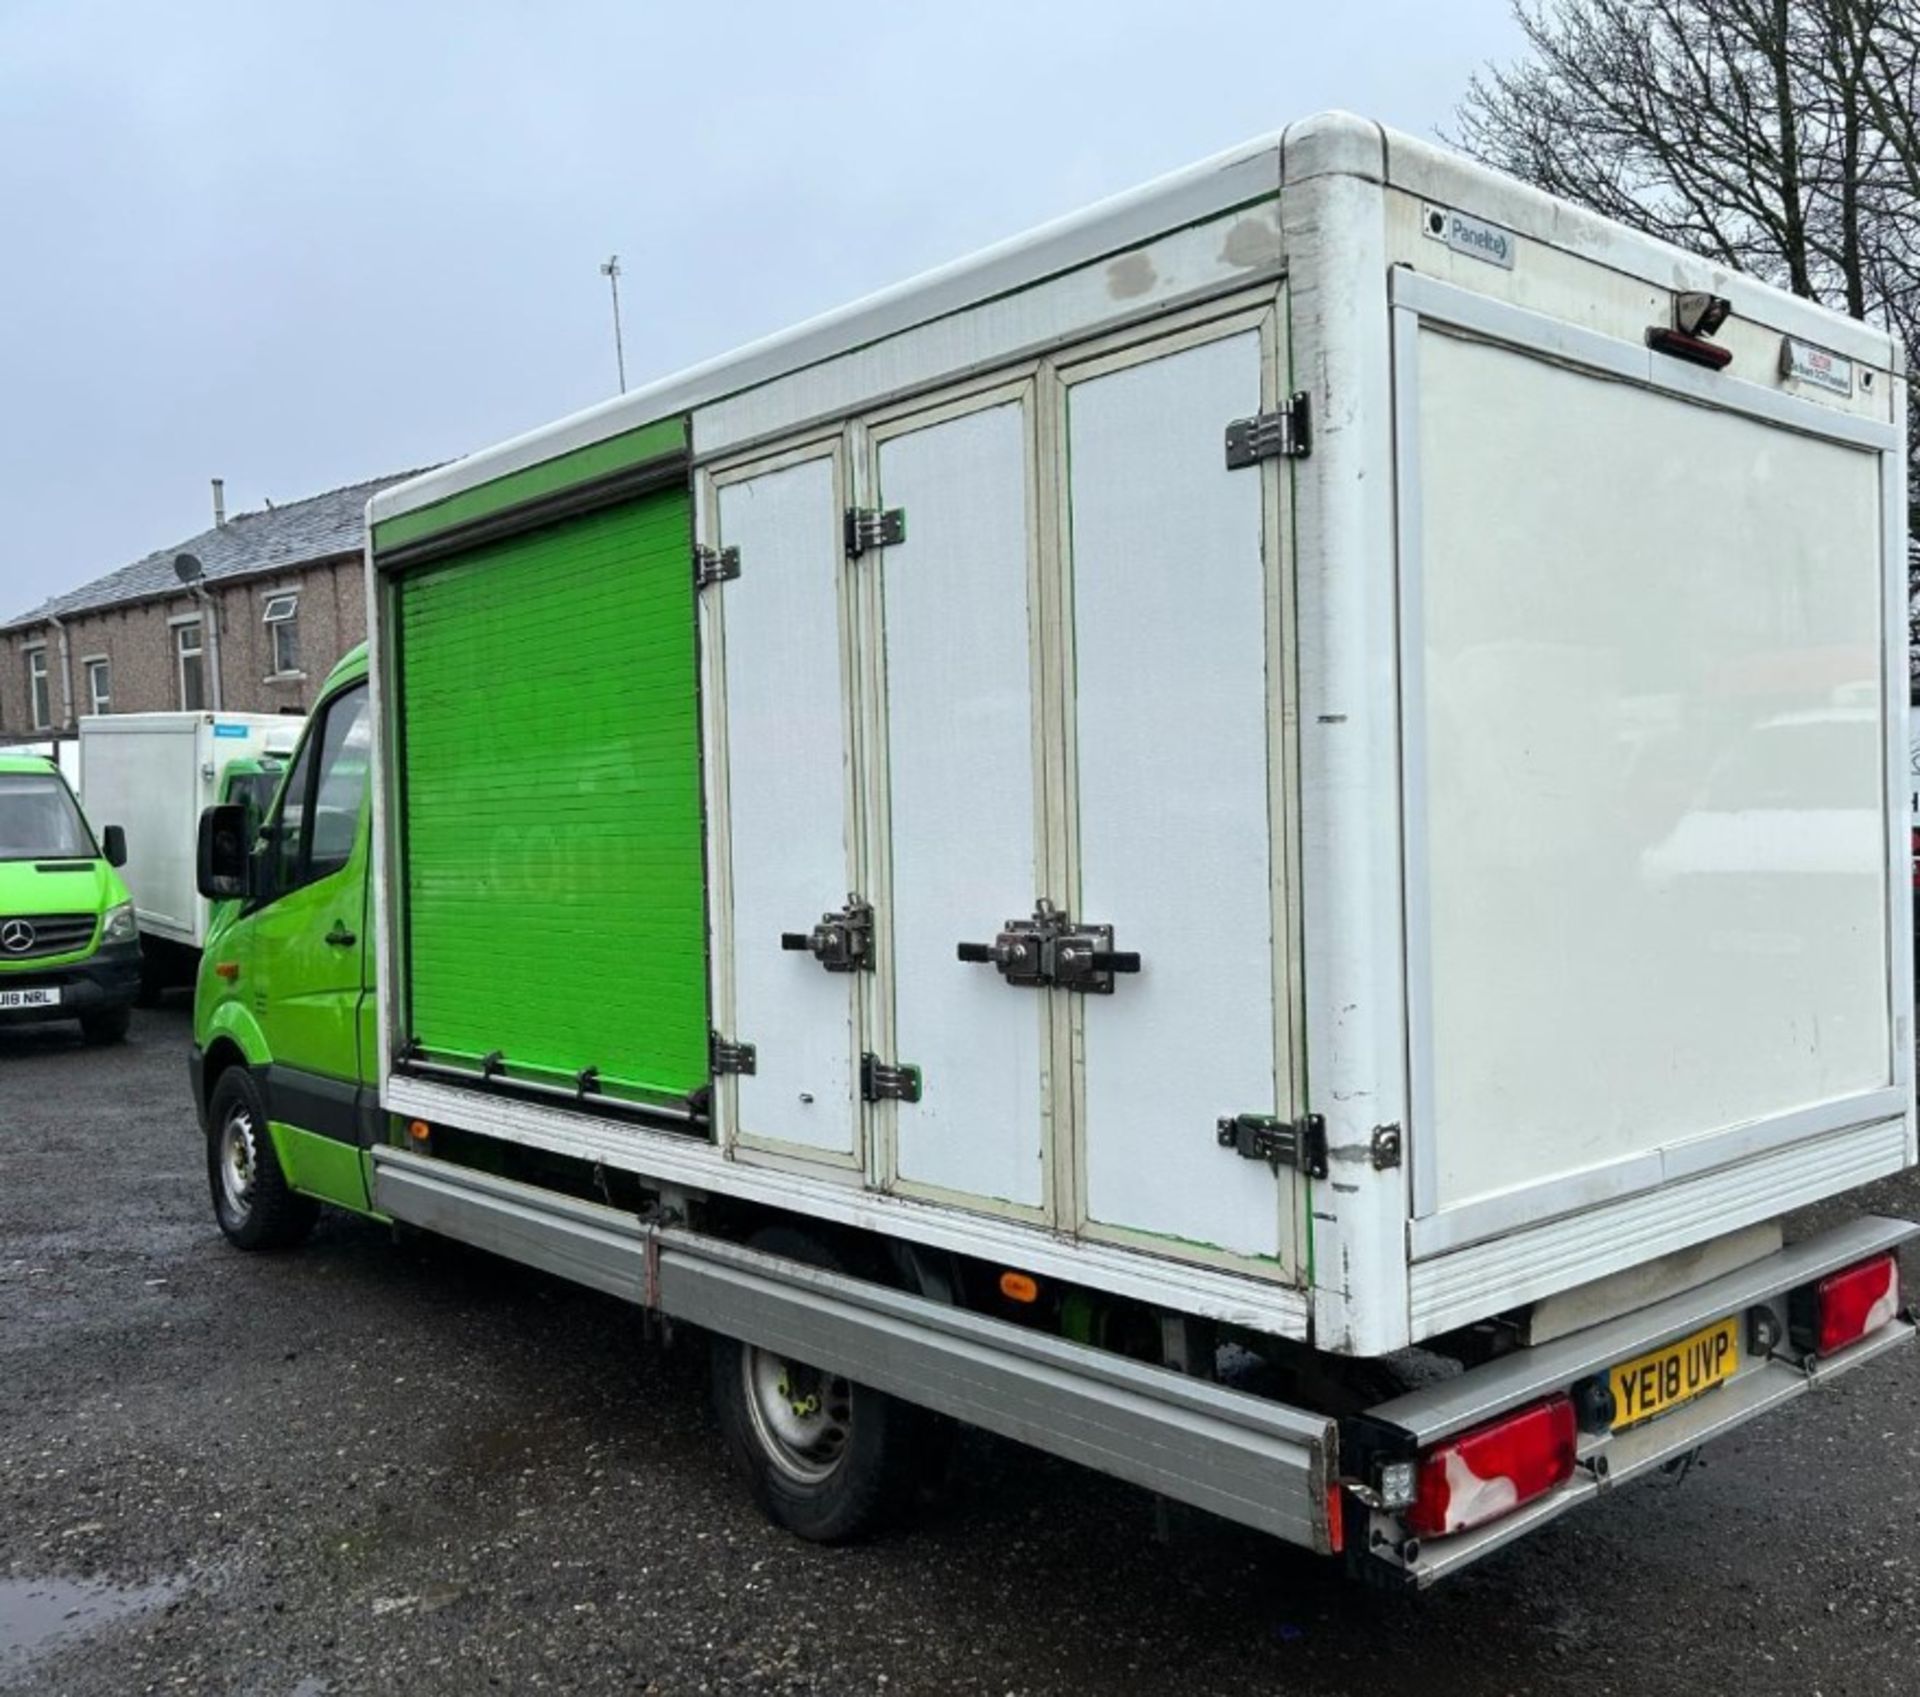 >>>SPECIAL CLEARANCE<<< 2018 MERCEDES-BENZ SPRINTER 314 CDI FRIDGE FREEZER CHASSIS CAB - Image 3 of 12